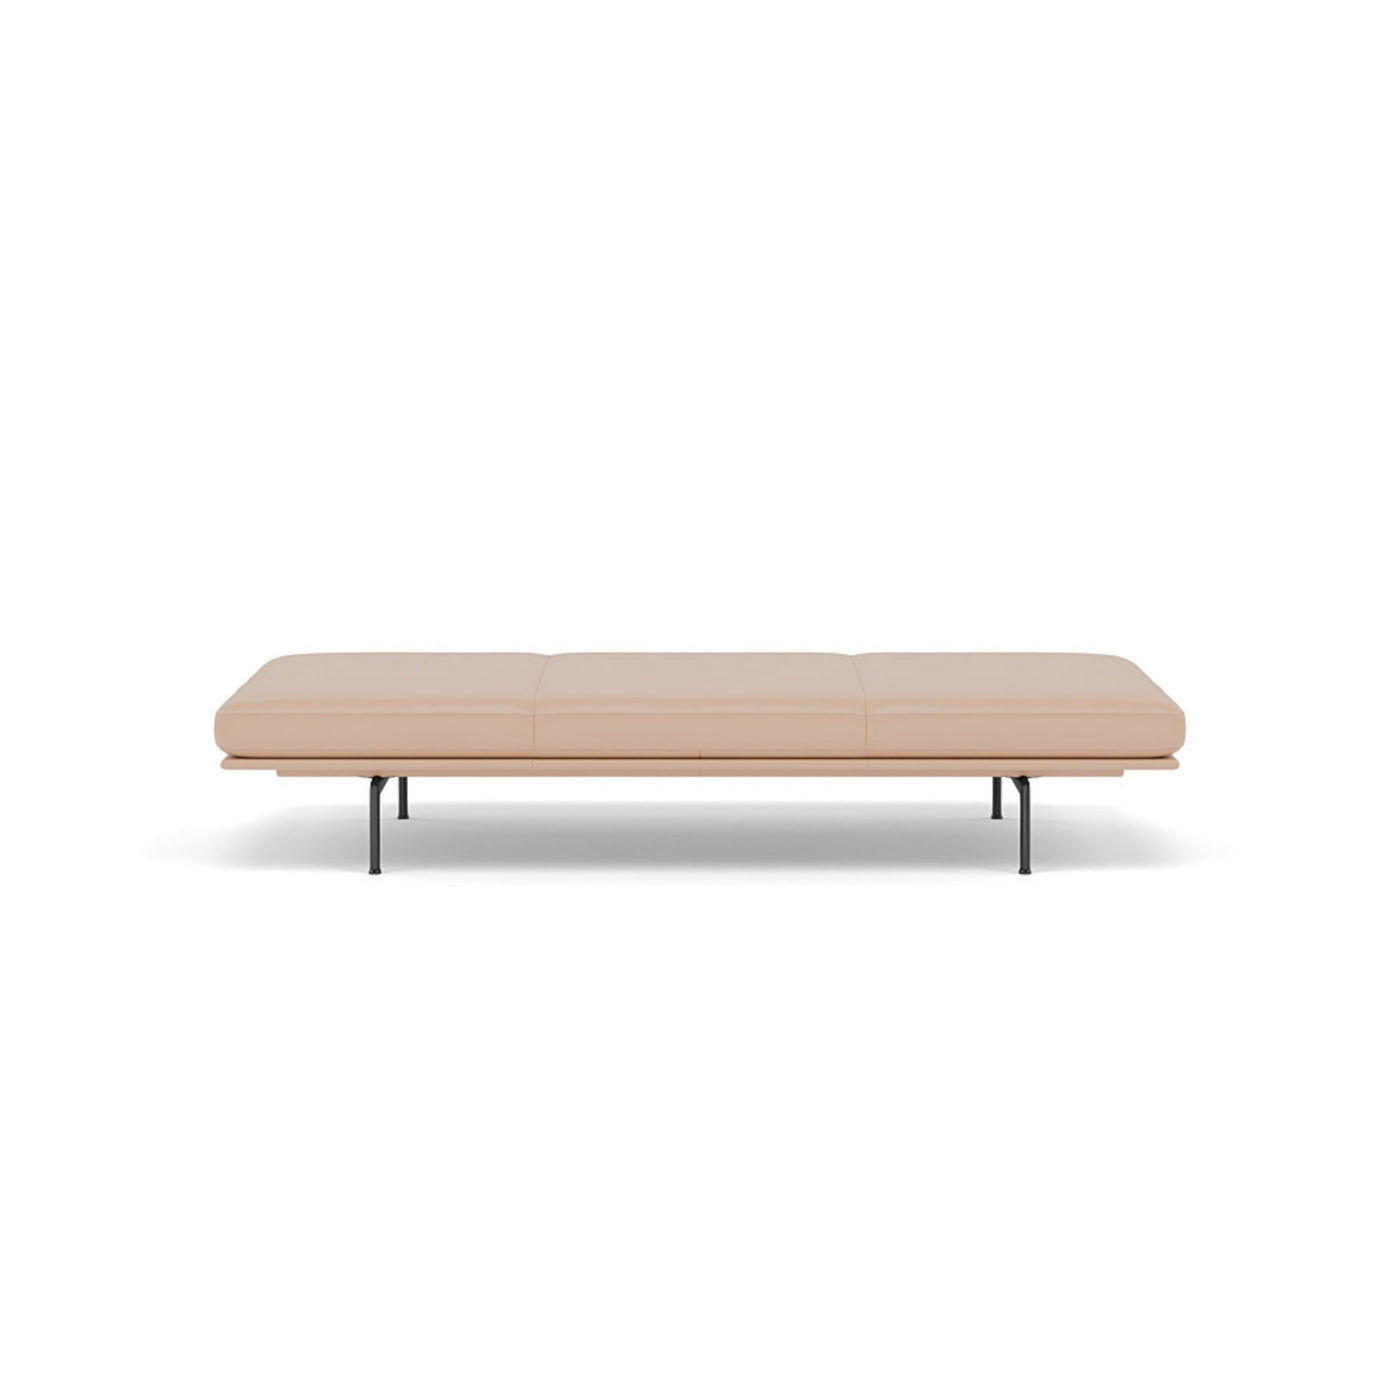 muuto outline daybed in beige refine leather and black legs. Made to order from someday designs. #colour_beige-refine-leather